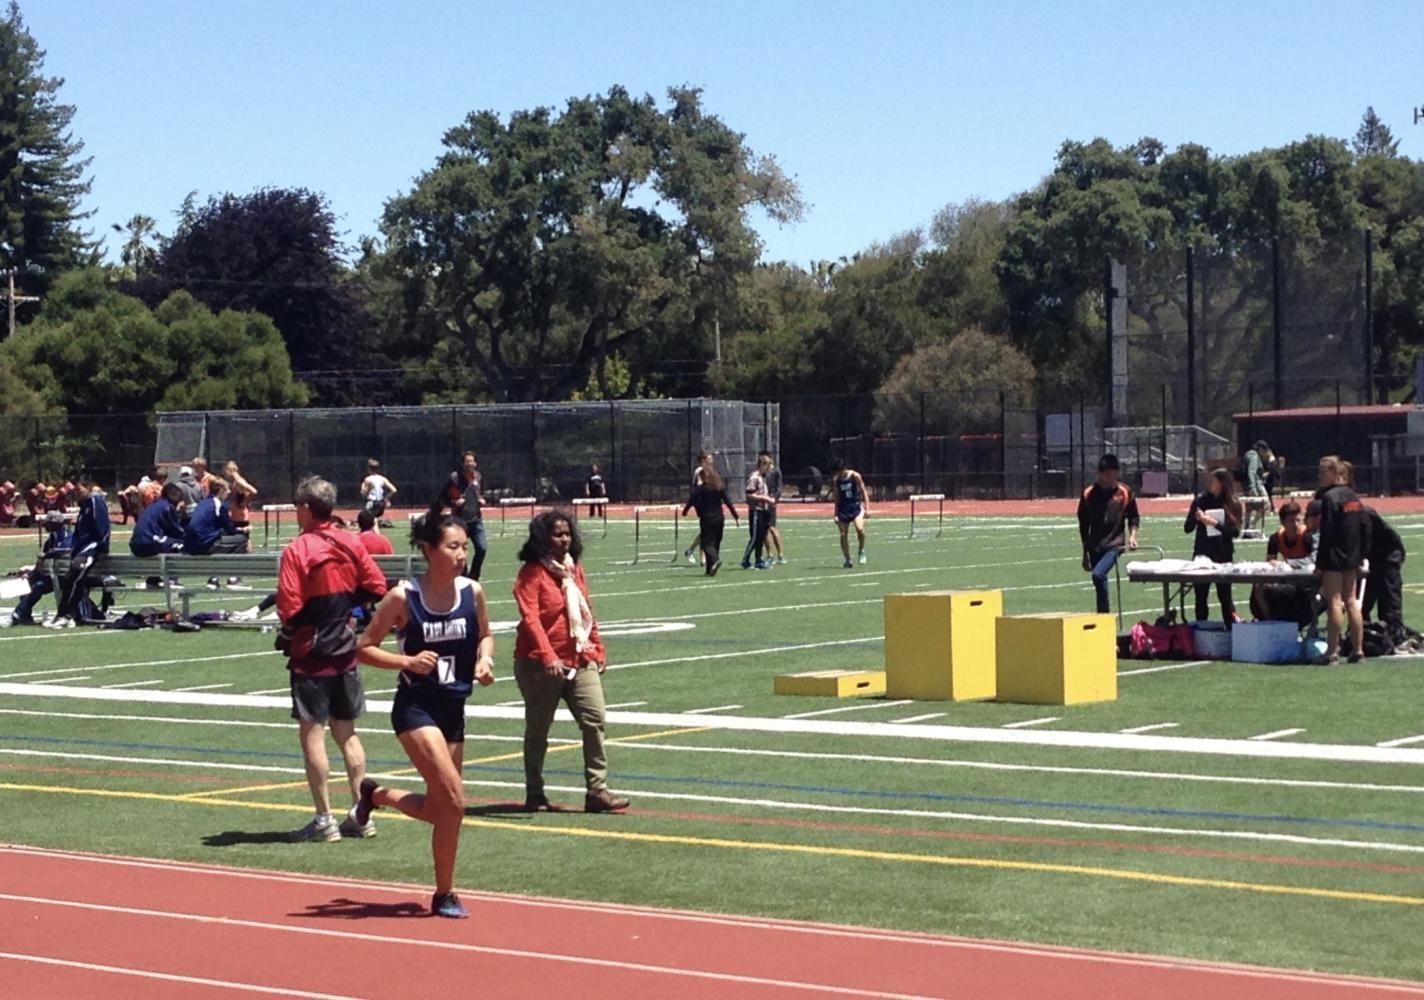 Megan Uozumi strides to the finish line during the 3200m race.